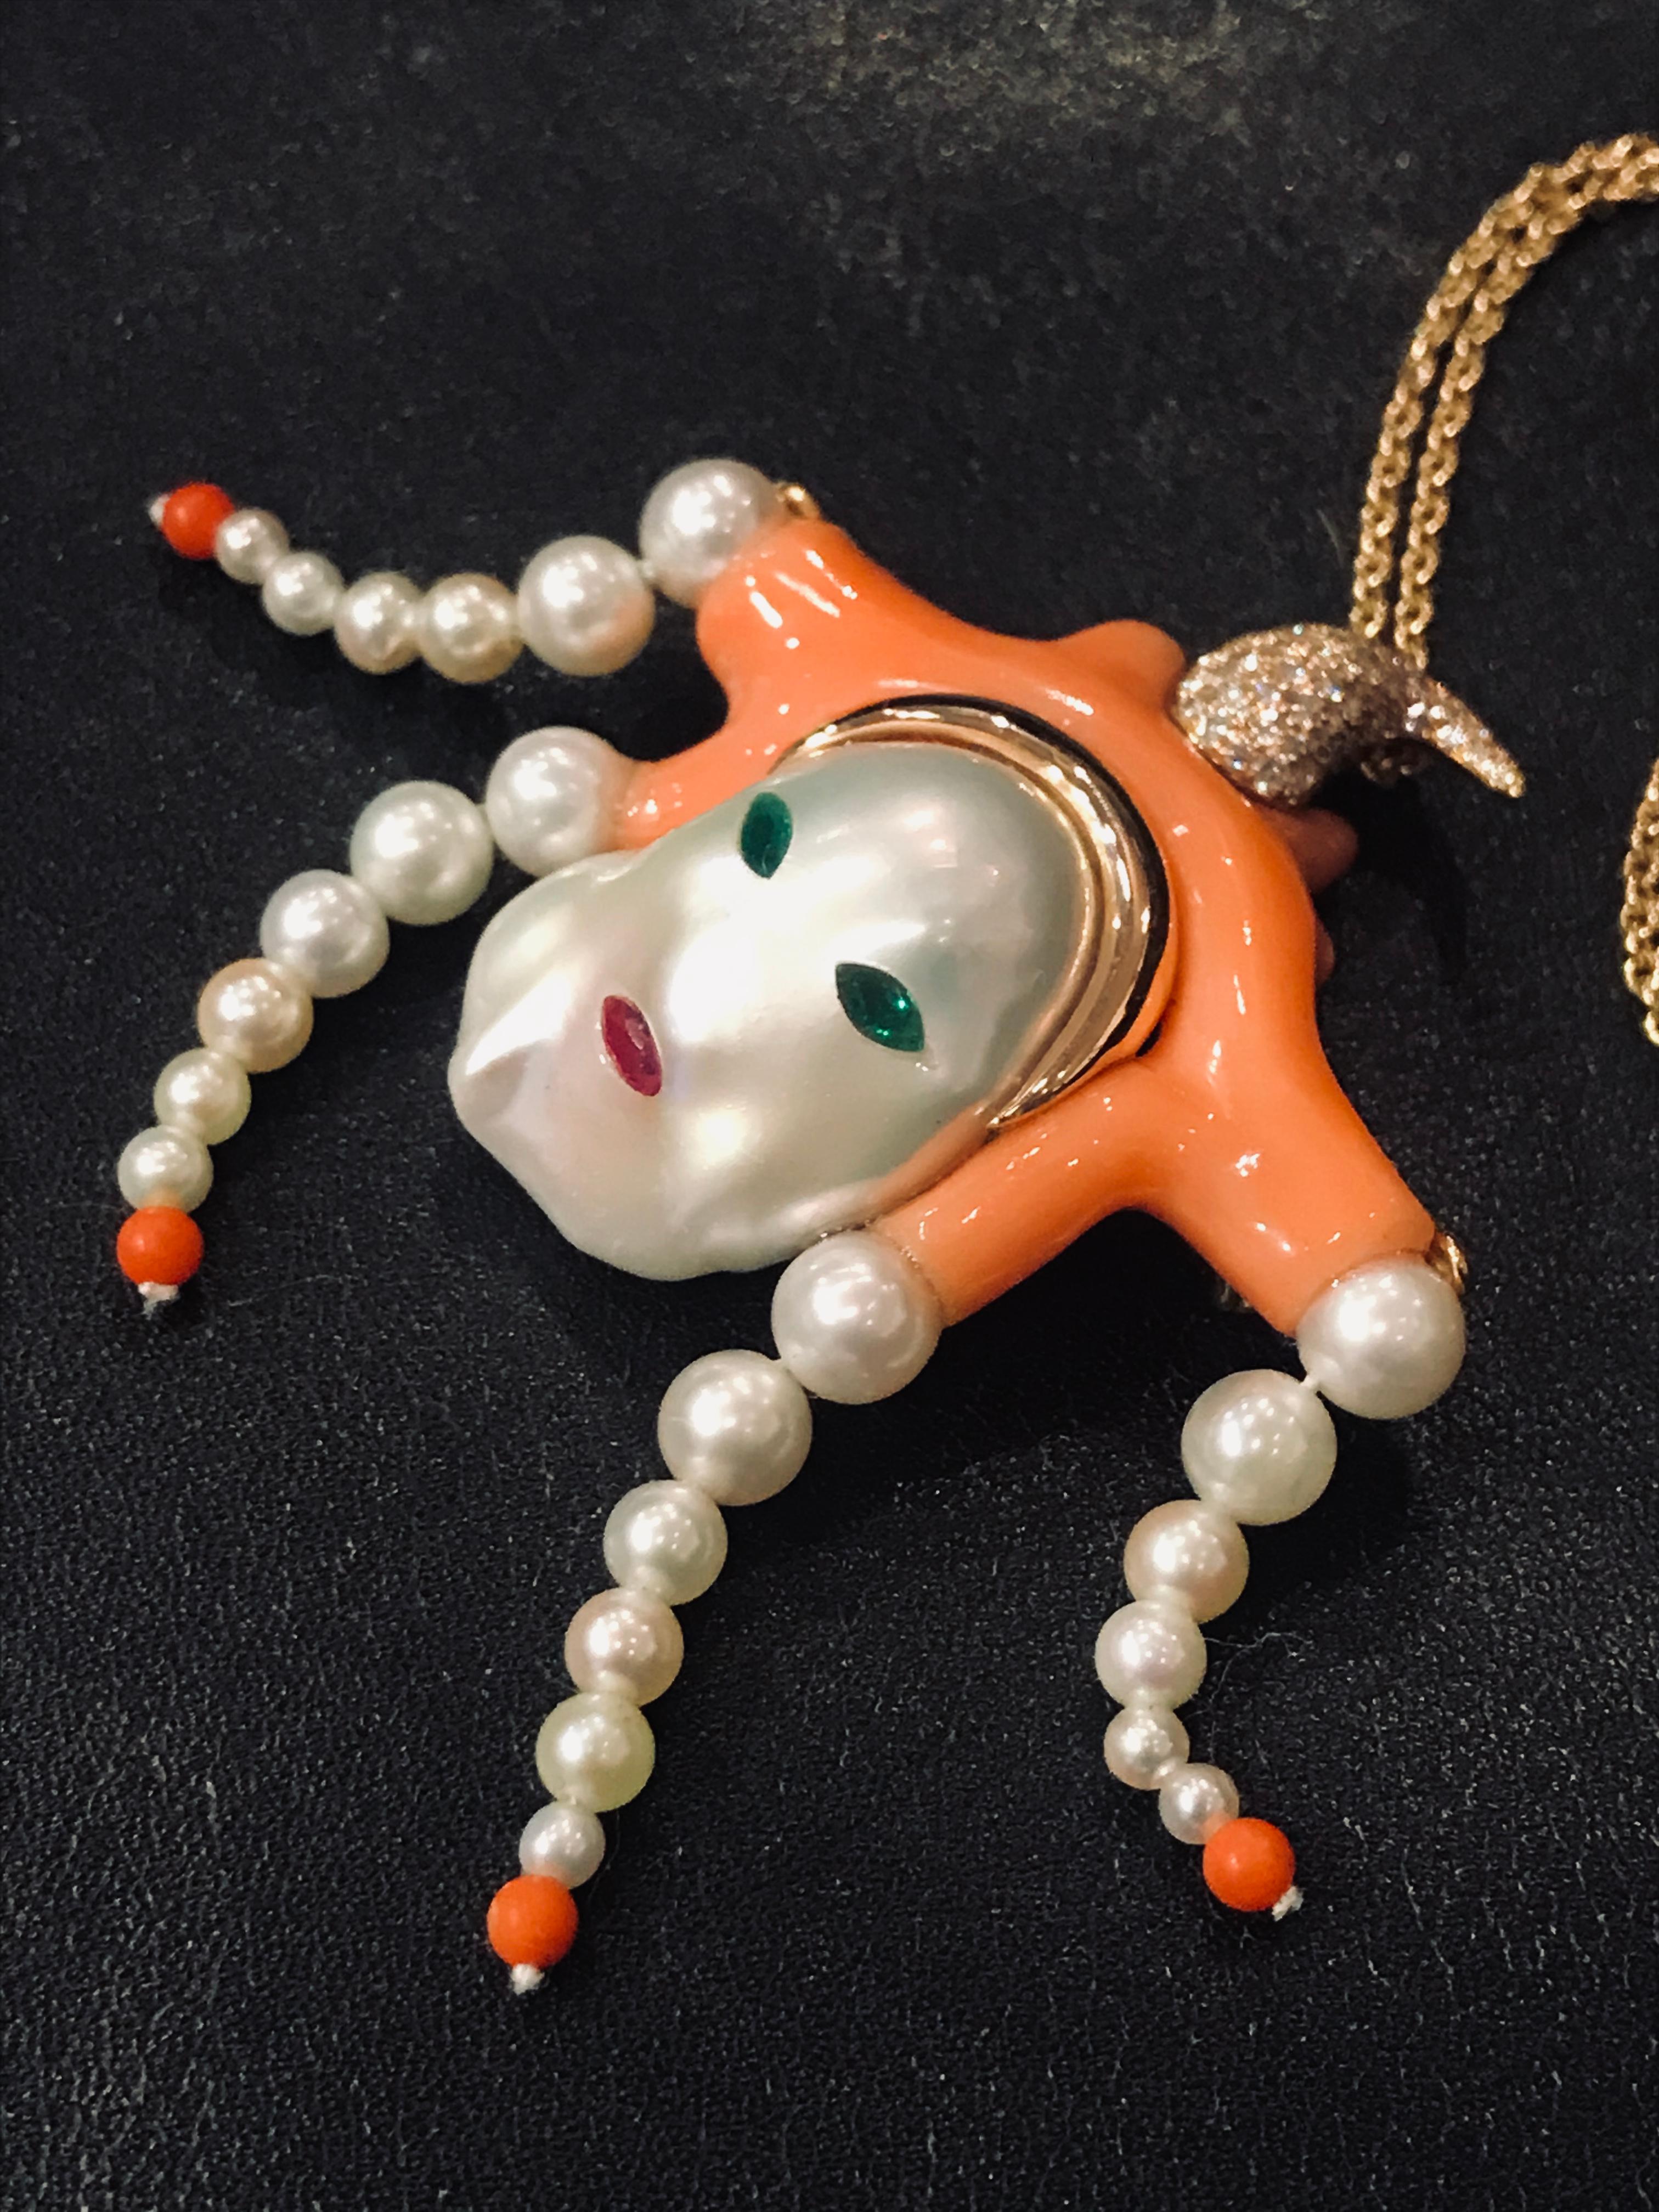 A one of a kind rose gold, natural pinkish-orange Mediterranean coral (Rubrum), diamonds ( 0,63 Cts), pearls, emeralds and ruby convertible brooch-pendant. 
This unique piece is called “Magot”, as a tribute to the occidental taste for “Chinoiserie”